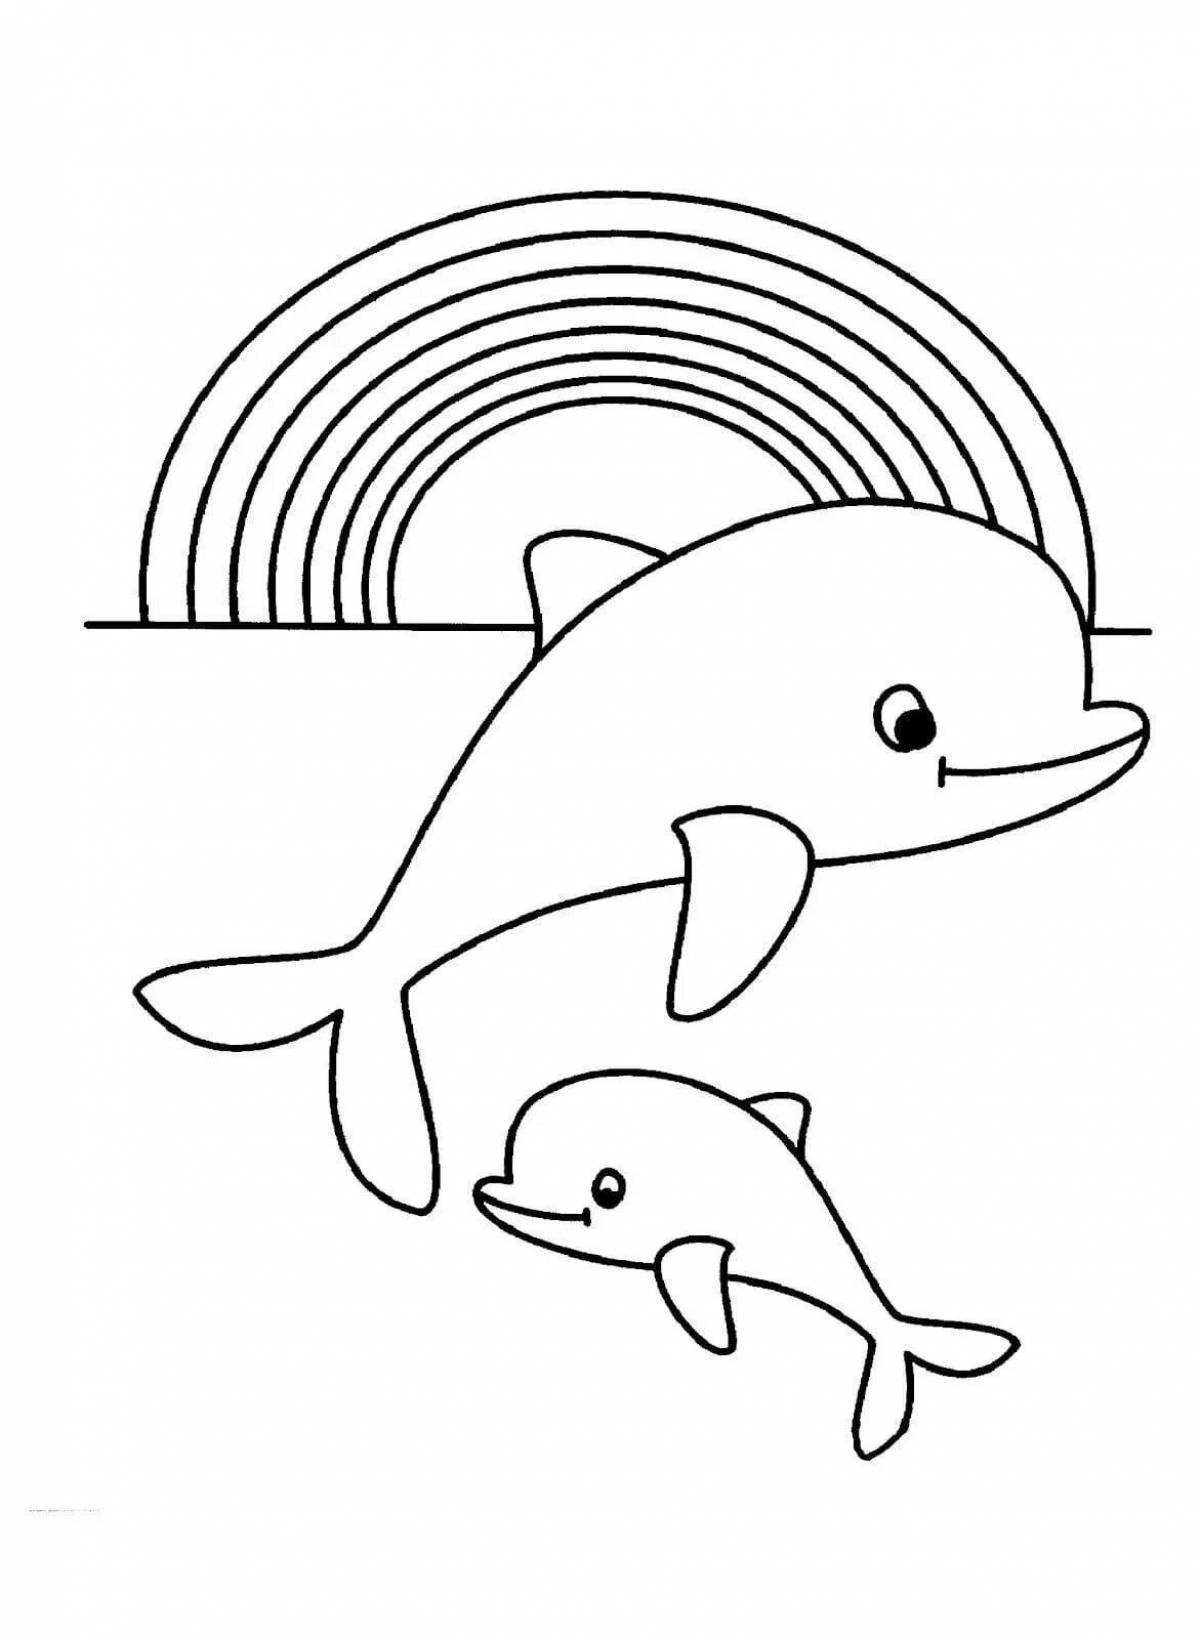 Dolphin for kids #7